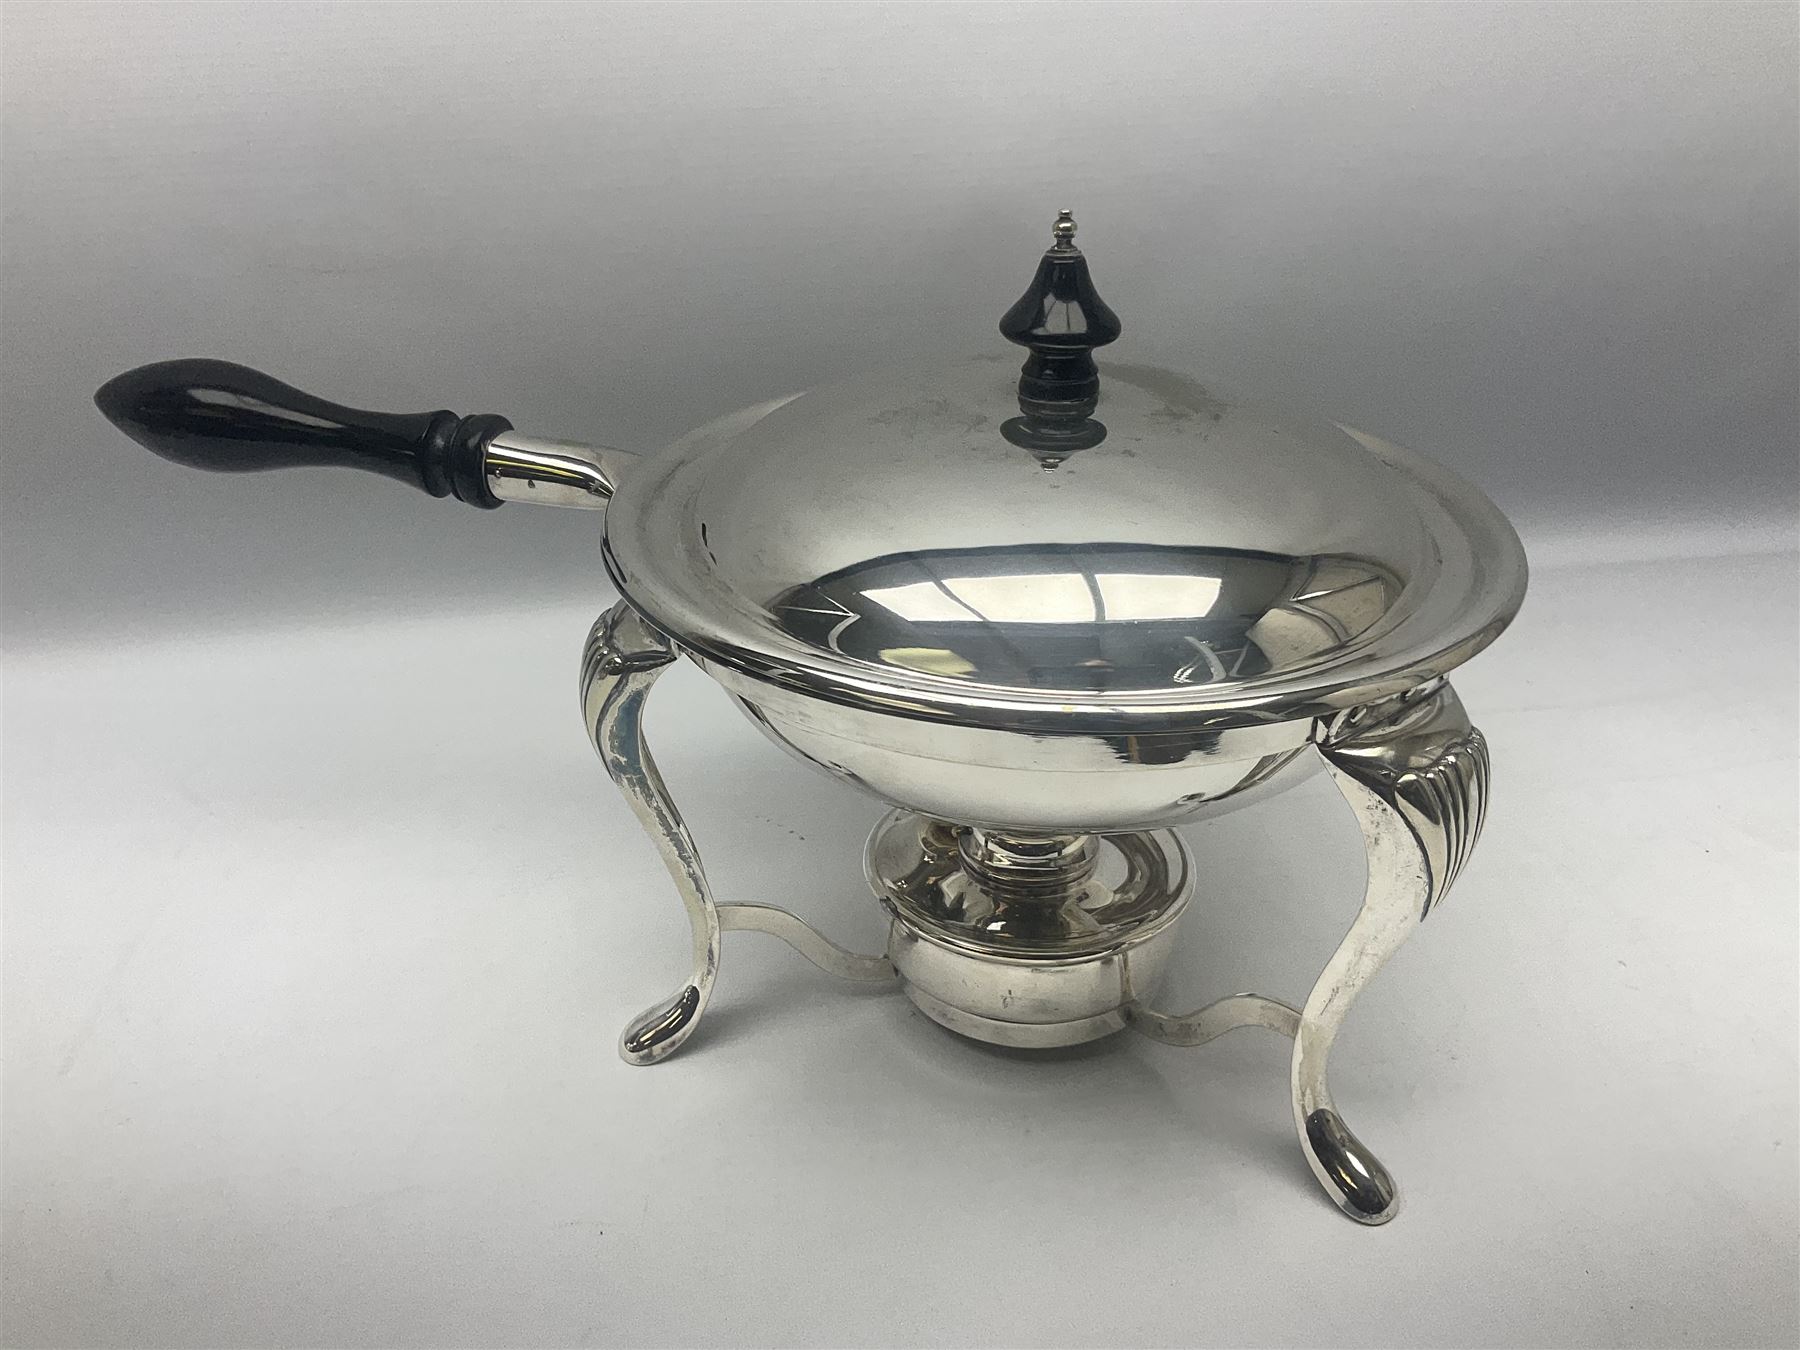 Walker & Hall silver plated long handled chafing dish - Image 8 of 18